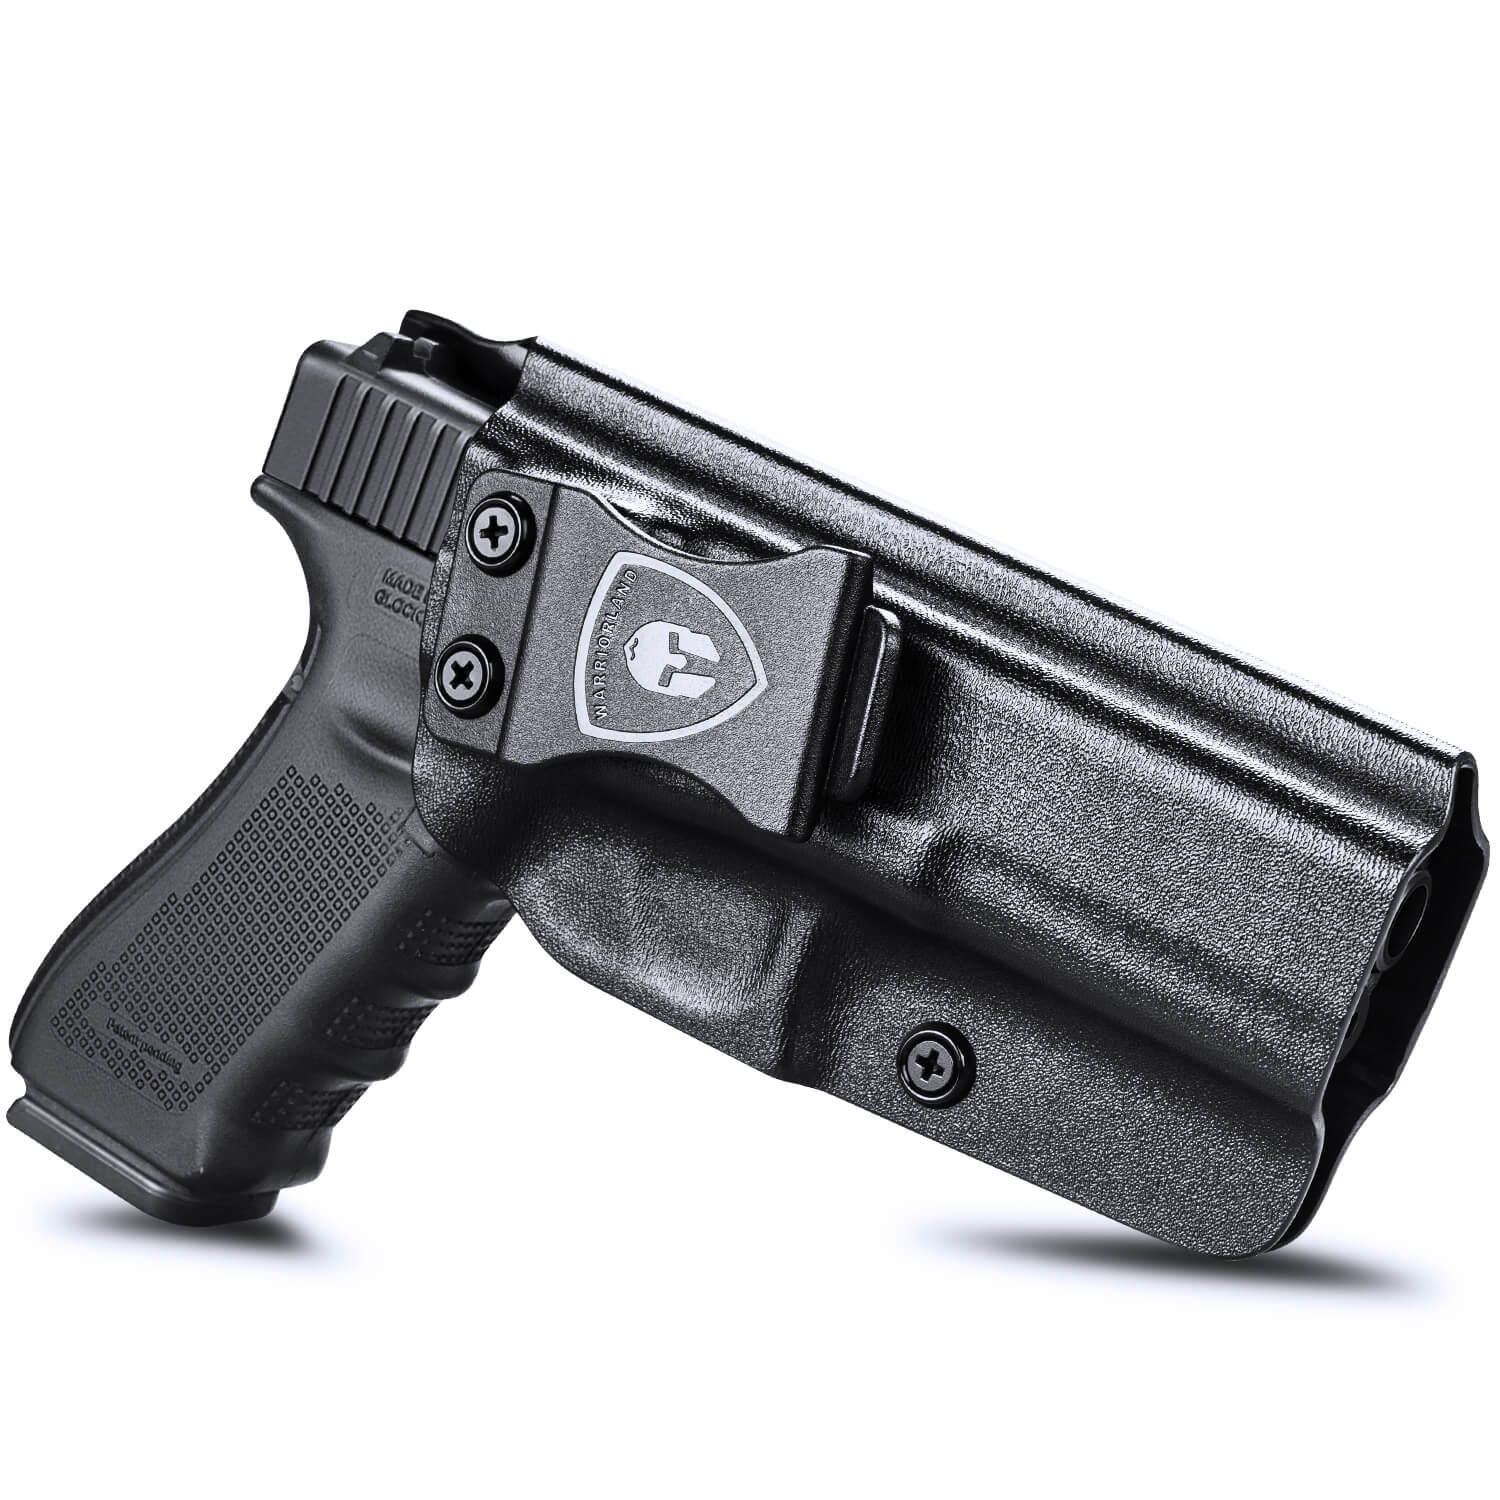 Kydex IWB Holster for Glock 17 / 22 / 31 Inside Waistband Concealed Carry Right/ Left Handed | WARRIORLAND